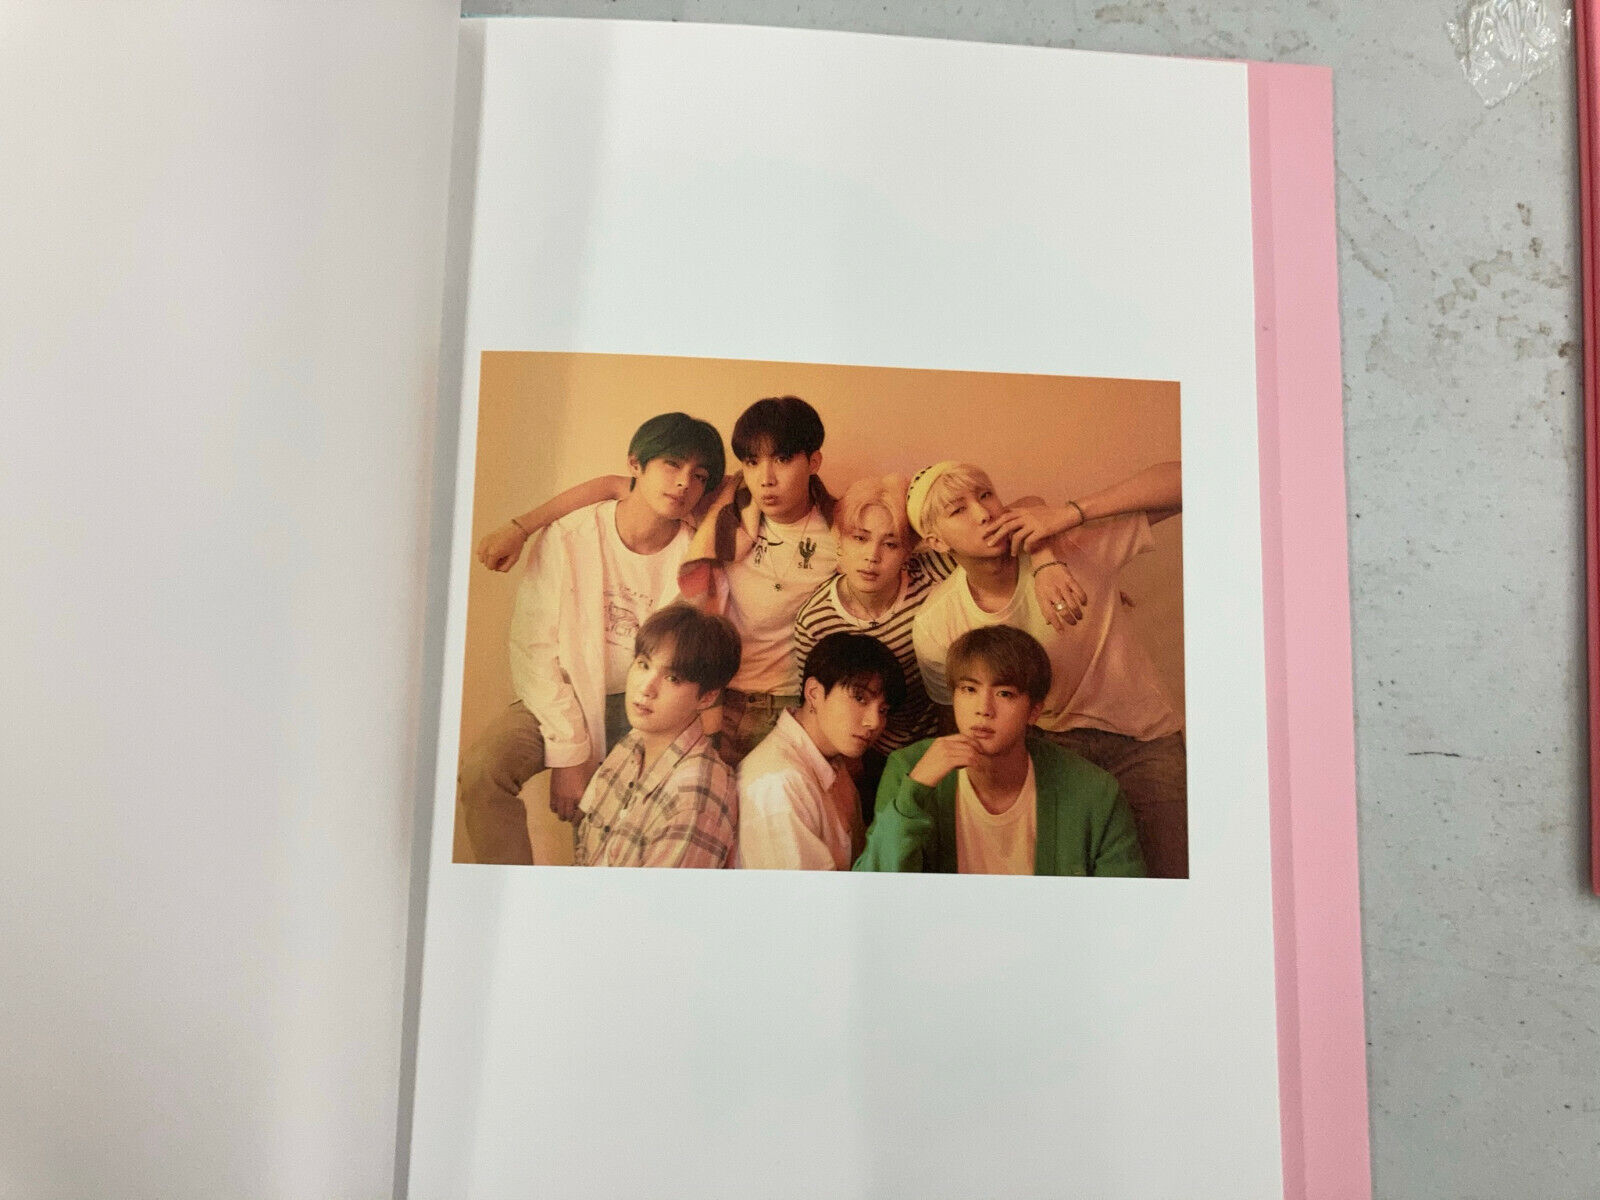 BTS - Map of the Soul: Persona (CD w/ Photobook, Postcard) - Pick your Version